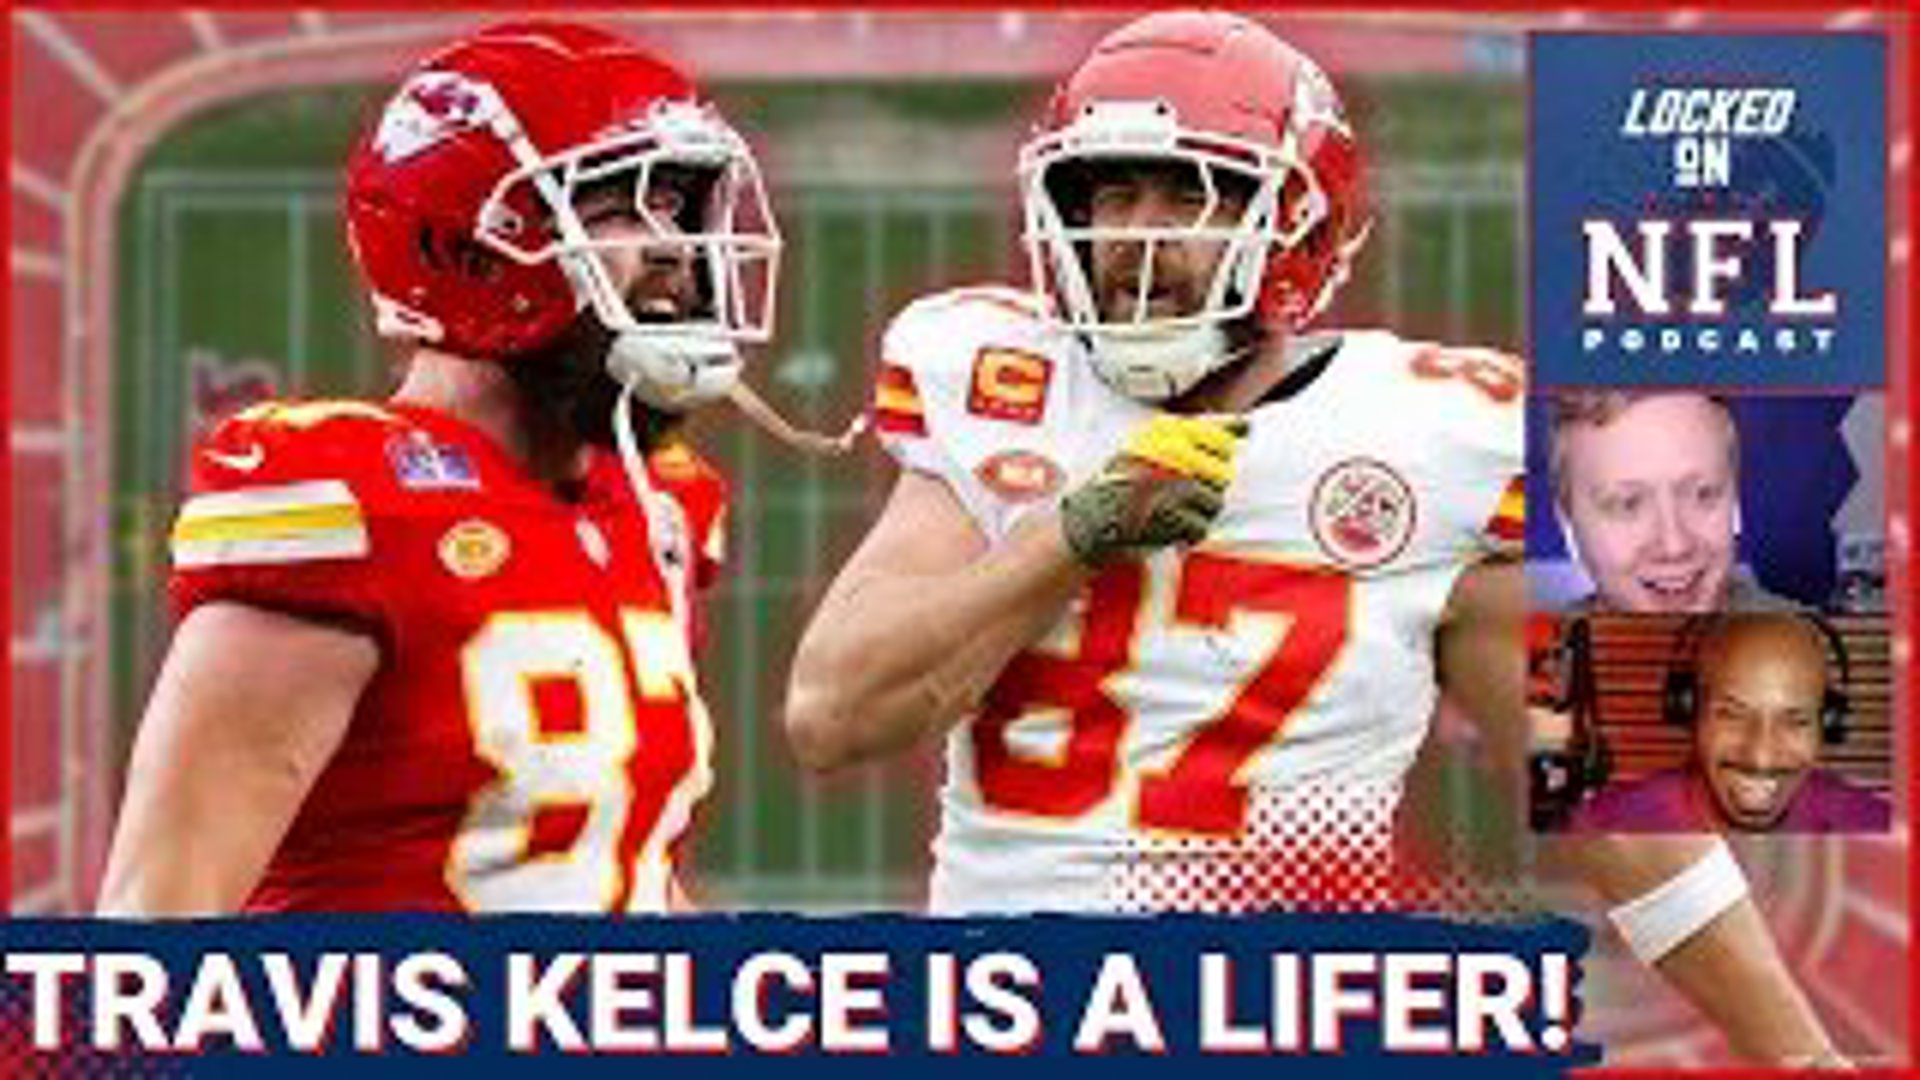 After receiving a two year extension, Kansas City Chiefs tight end Travis Kelce looks set to finish his career as a lifer with the Chiefs.